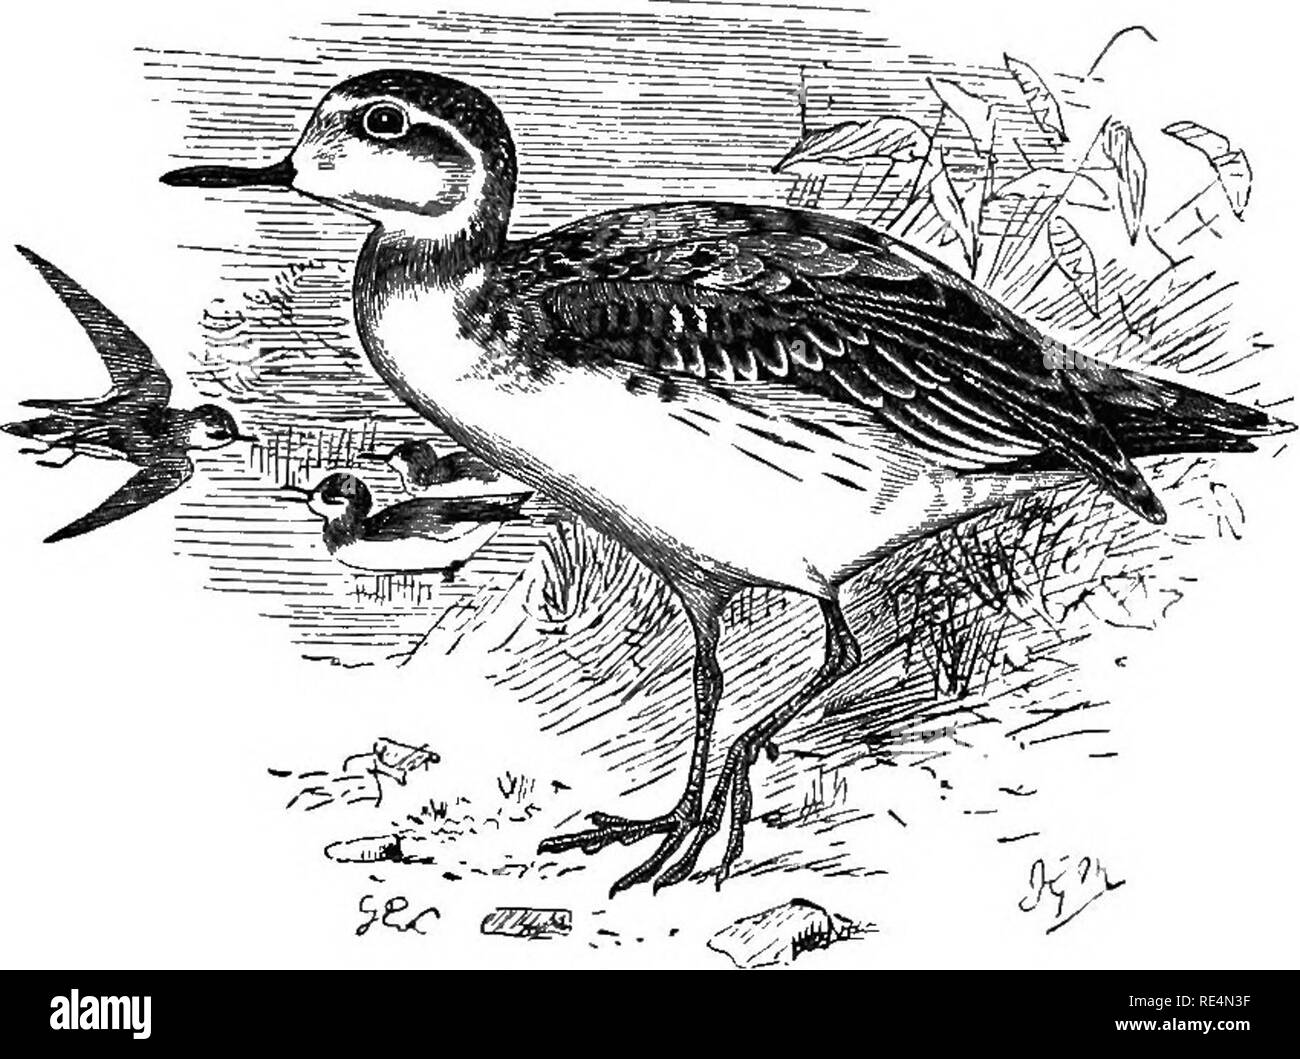 . The geographical distribution of the family Charadriidae, or, The plovers, sandpipers, snipes, and their allies . Shore birds. PHALAEOPTJS. No local races of this species are known. 339 Tringa fiilicaria, Linneus, Syst. Nat. i. p. 148 (1758) ; Linn. Syst. Nat. i. p. 249 (1766). Phalaropus phalaropus, Brisson, Orn. vi. p. 13 (1760, winter plumage). Phalaropus rufescens, Brisson, Orn. vi. p. 20 (1760, summer plumage). Phalaropus lobatus [Linn.), apud Tunstall, Orn. Brit. p. 3 (1771). Phalaropus rufus, Bechstein, Naturg. Deutsclil. ed. 2, iv. p. 381 (1809). Phalaropus platyrhynchus, Temminck, M Stock Photo